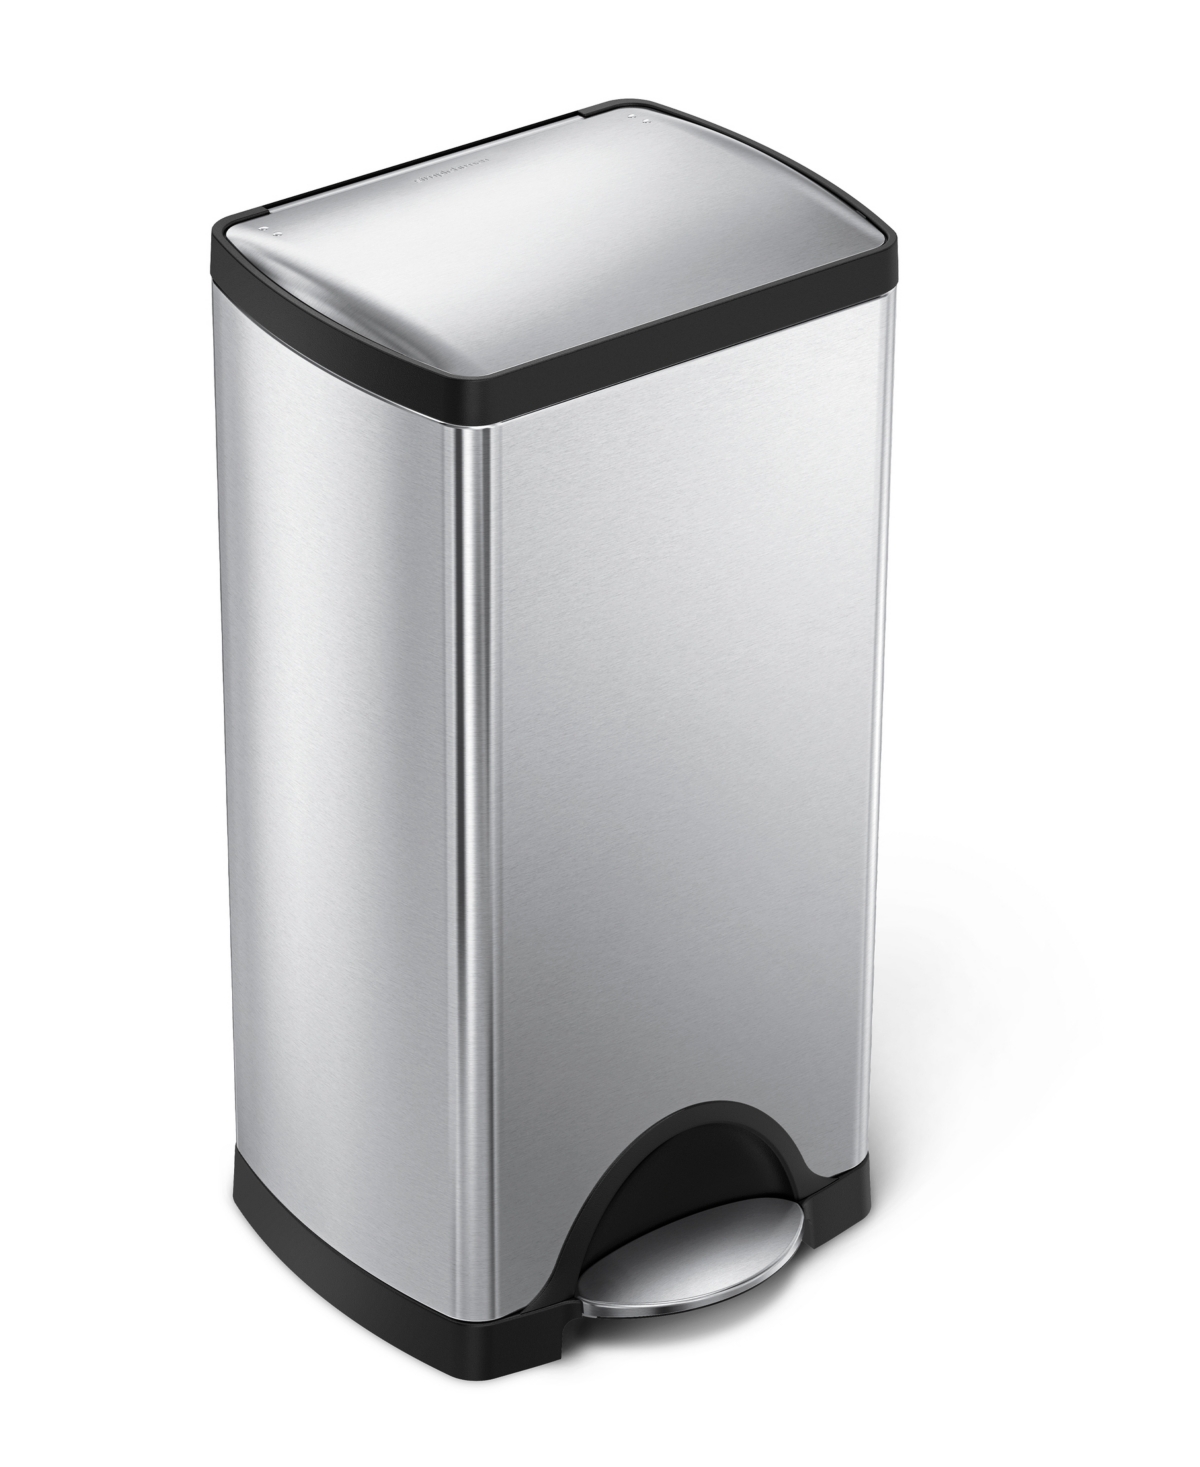 Simplehuman 30 Litre Rectangular Step Can In Brushed Stainless Steel